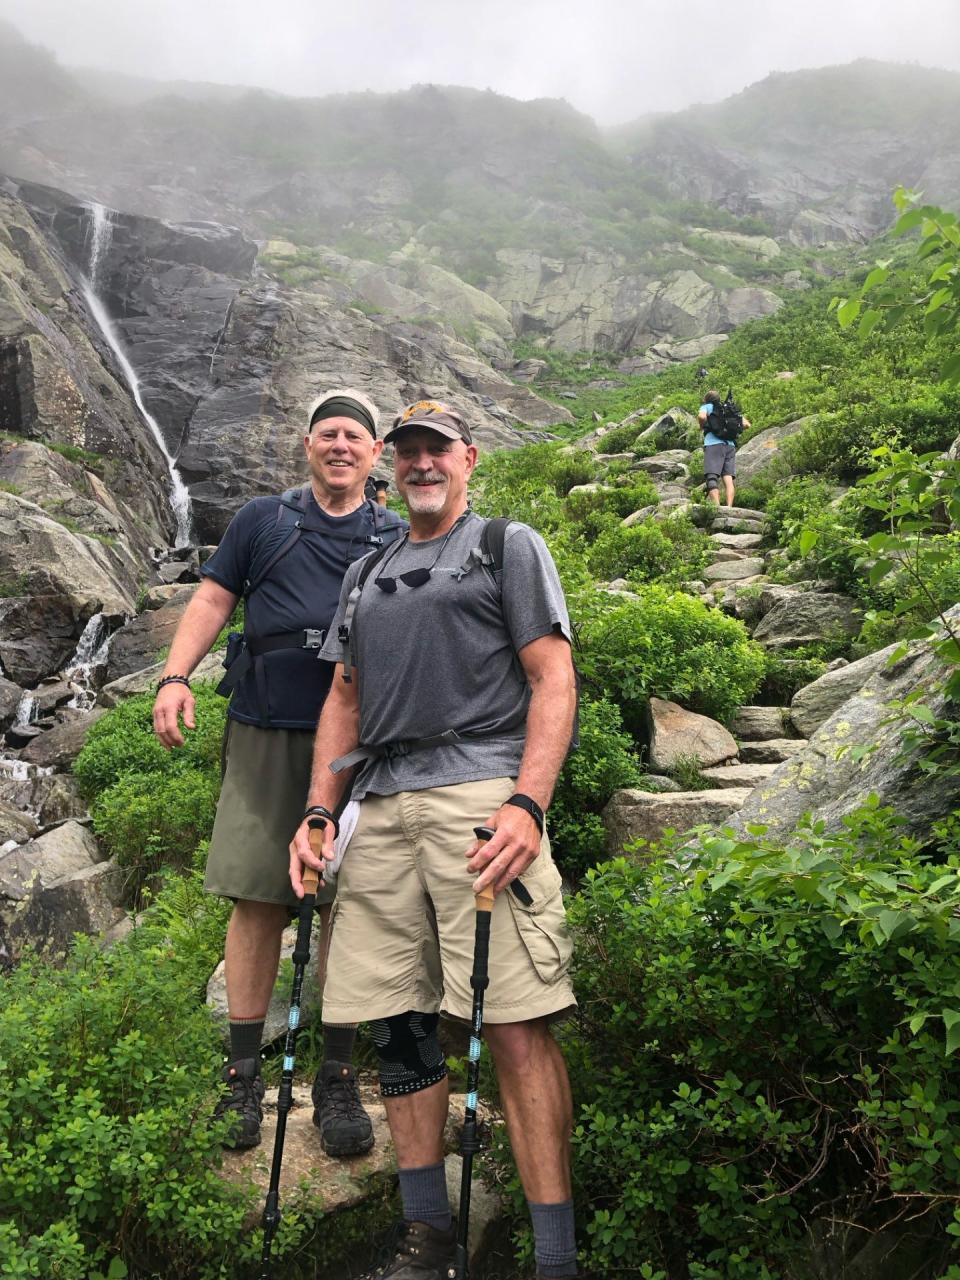 Dave Buckley, left, and Steve Morelli on the steepest part of the climb, approaching the Tuckerman Ravine wall, en route to the summit of Mt. Washington.